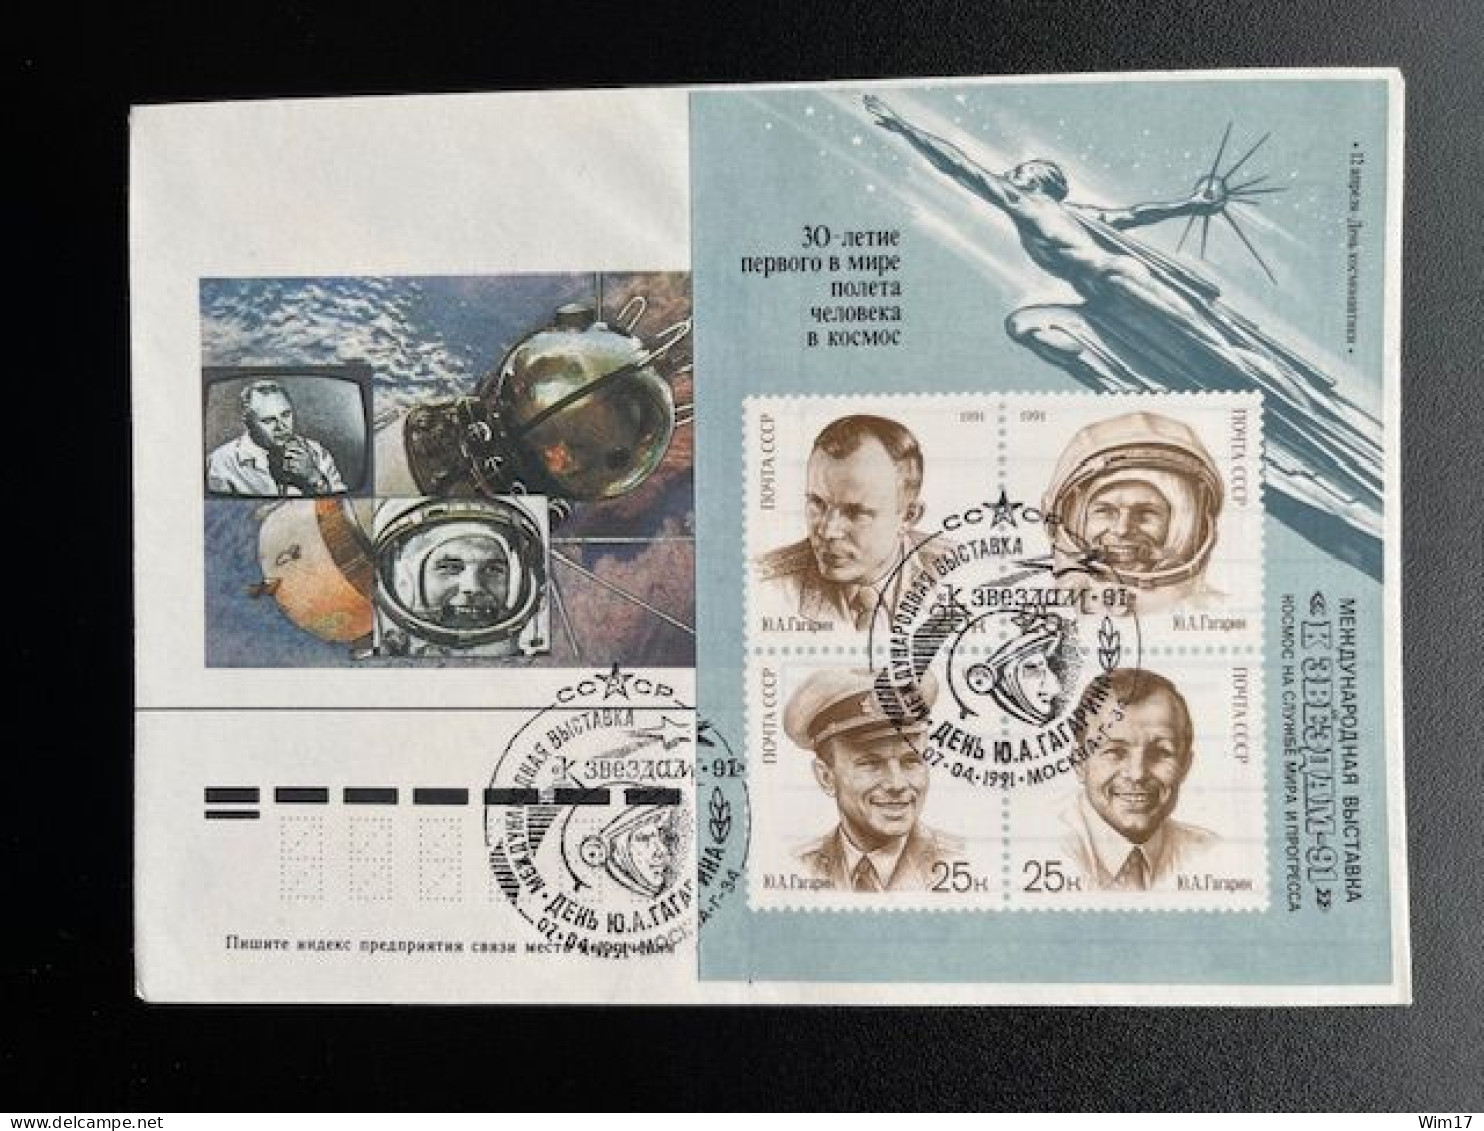 RUSSIA USSR 1991 COVER 30 YEAR ANNIVERSERY FIRST MANNED SPACE FLIGHT SOVJET UNIE CCCP SOVIET UNION SPACE - Briefe U. Dokumente